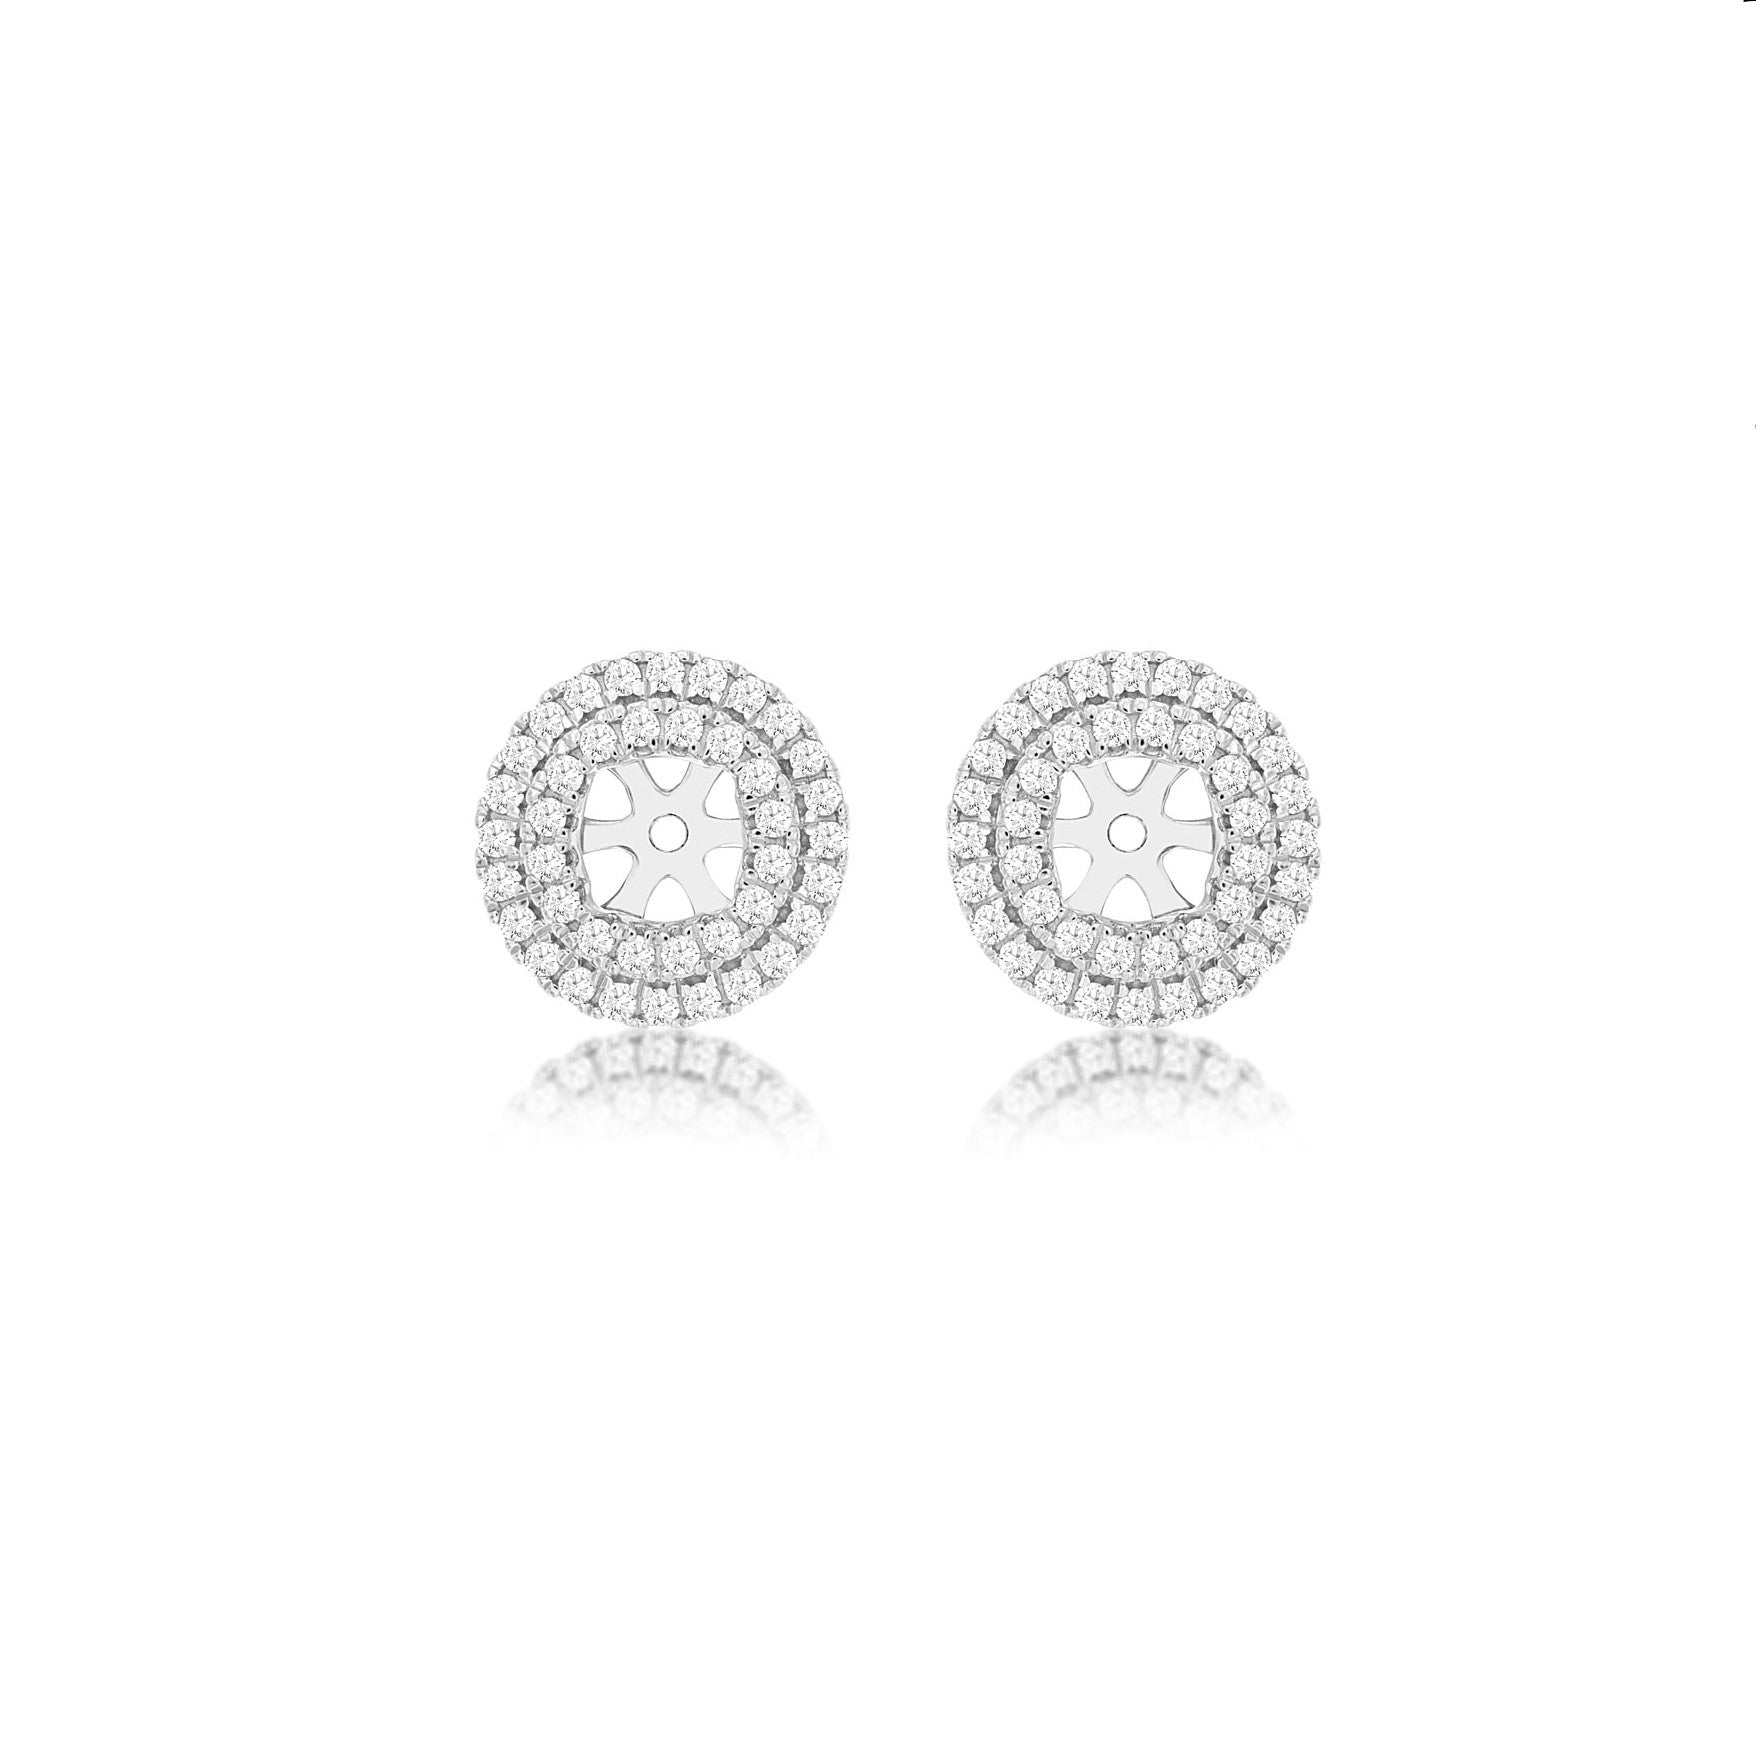 Buy Modern Organic Earring Jackets for Your Studs Earring Jackets for Diamond  Studs Jackets for Earrings Pearl Earring Jacket Ear Jacket Online in India  - Etsy